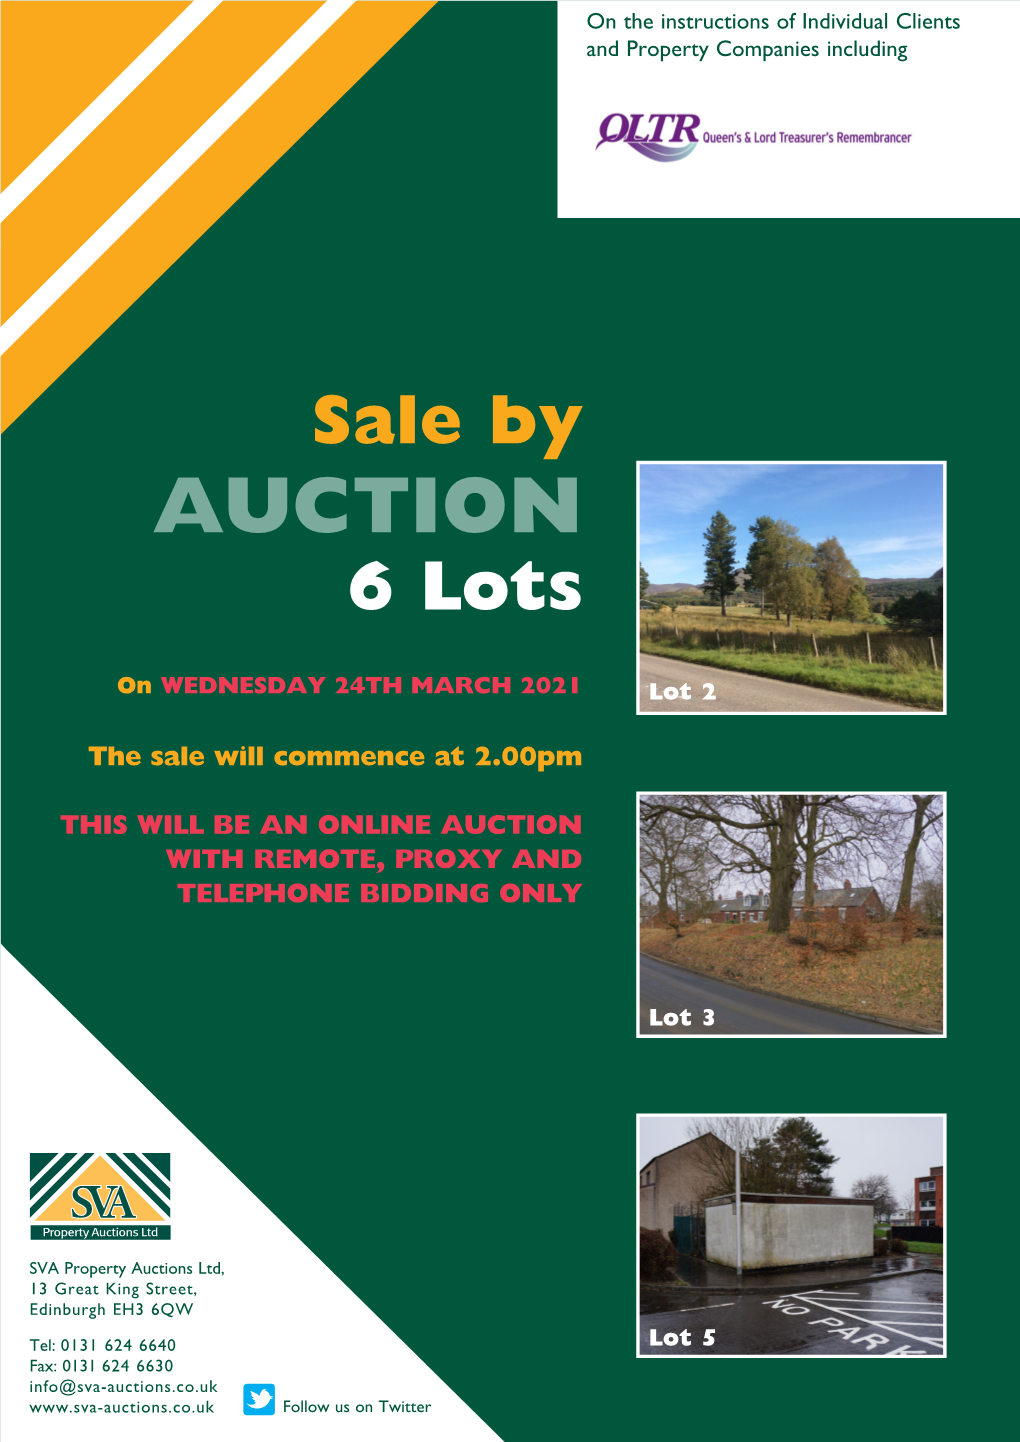 Download Our Latest Auction Brochure